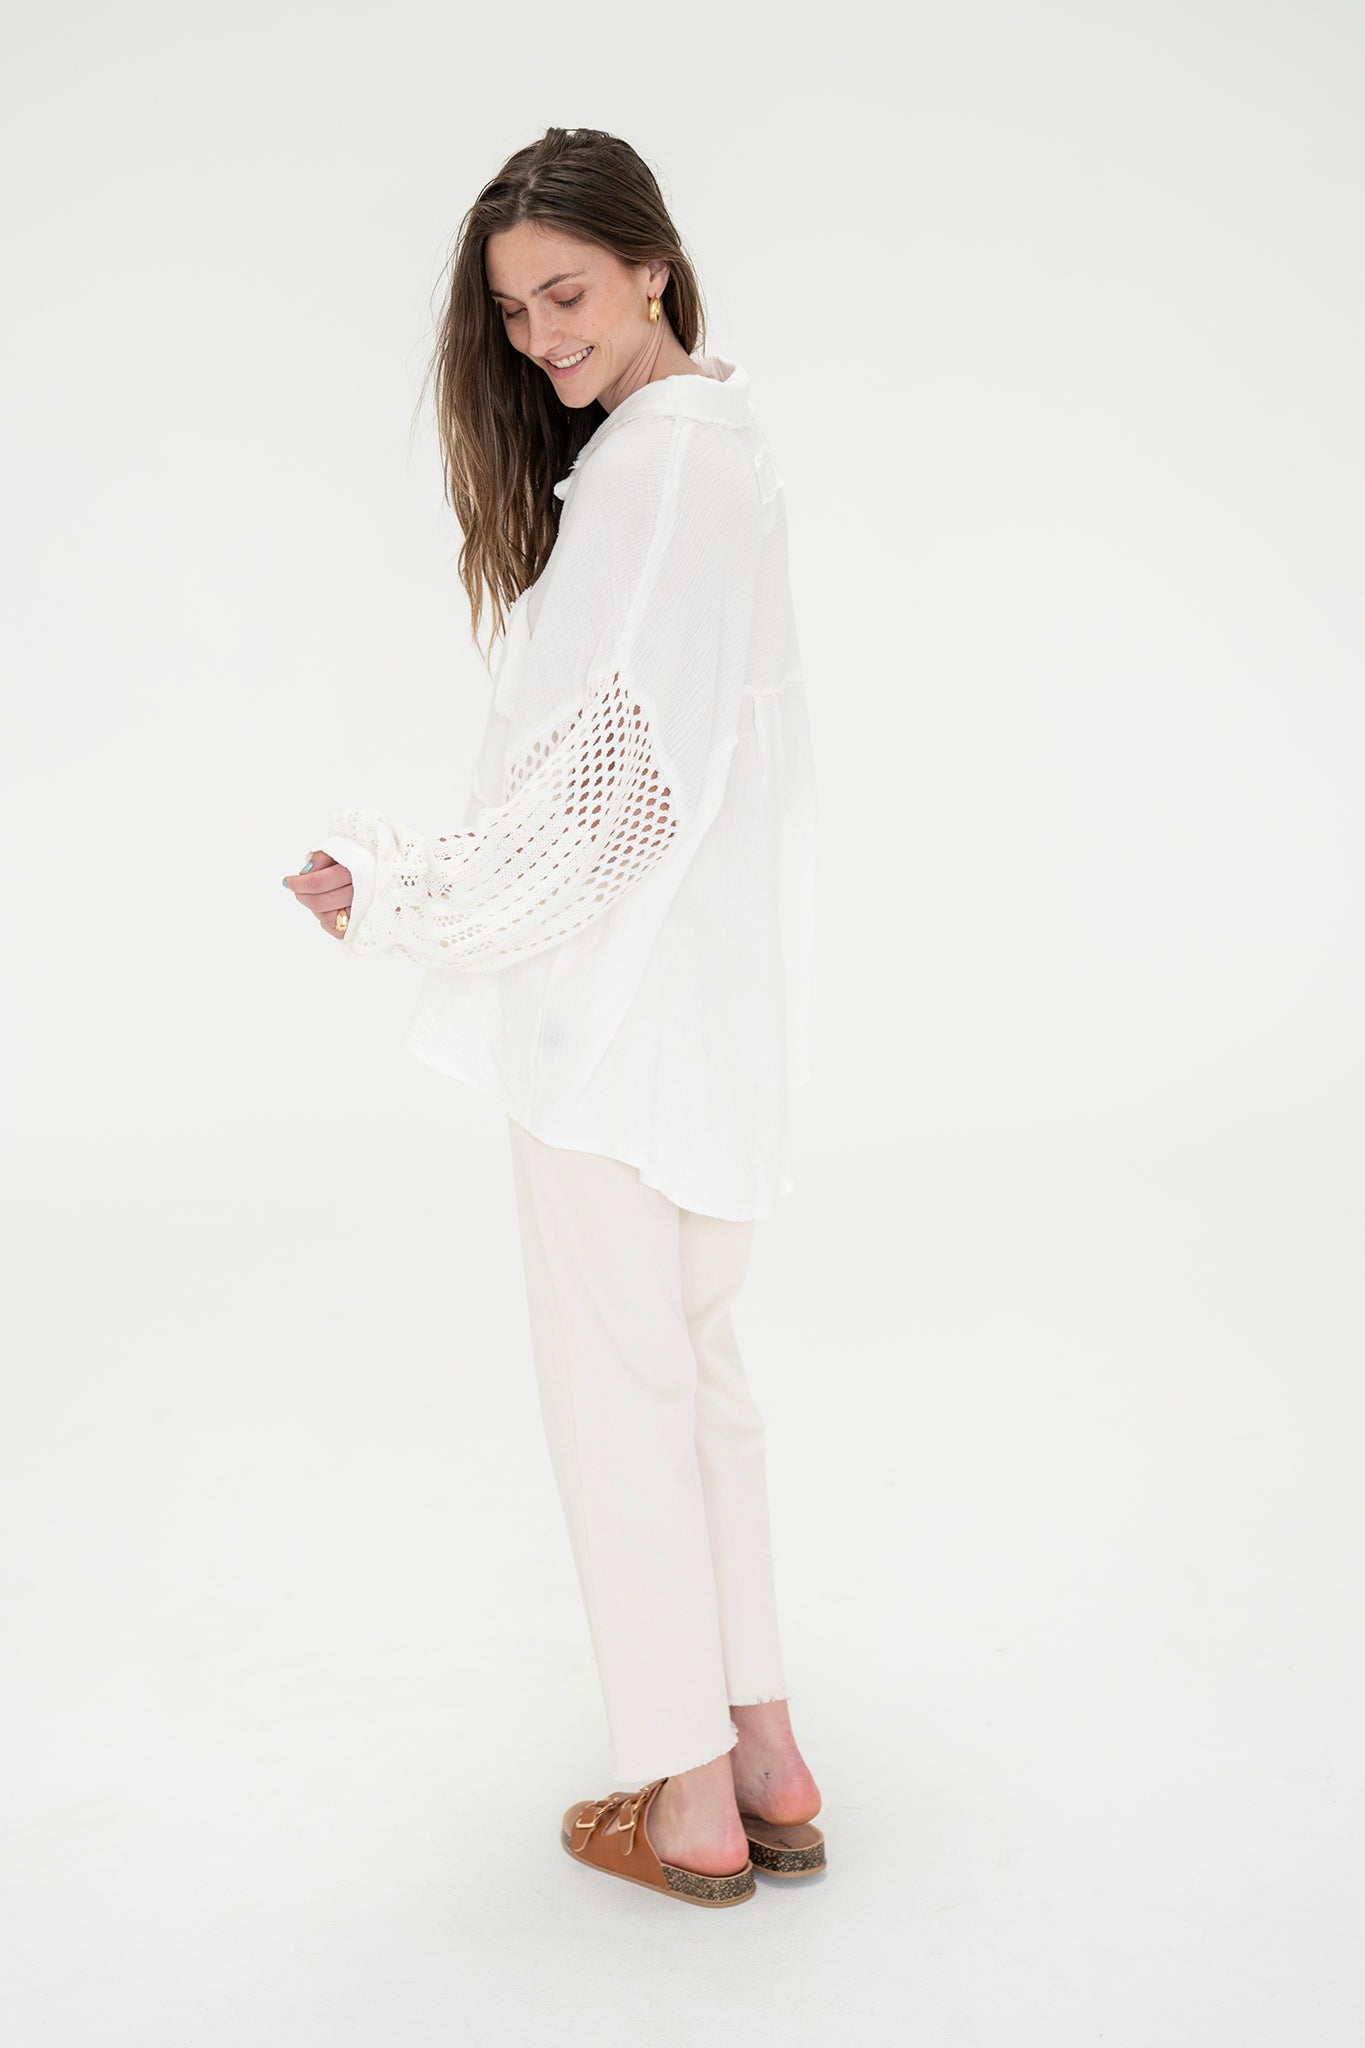 View 7 of Wisteria Cardigan in Off White, a Sweaters from Larrea Cove. Detail: .